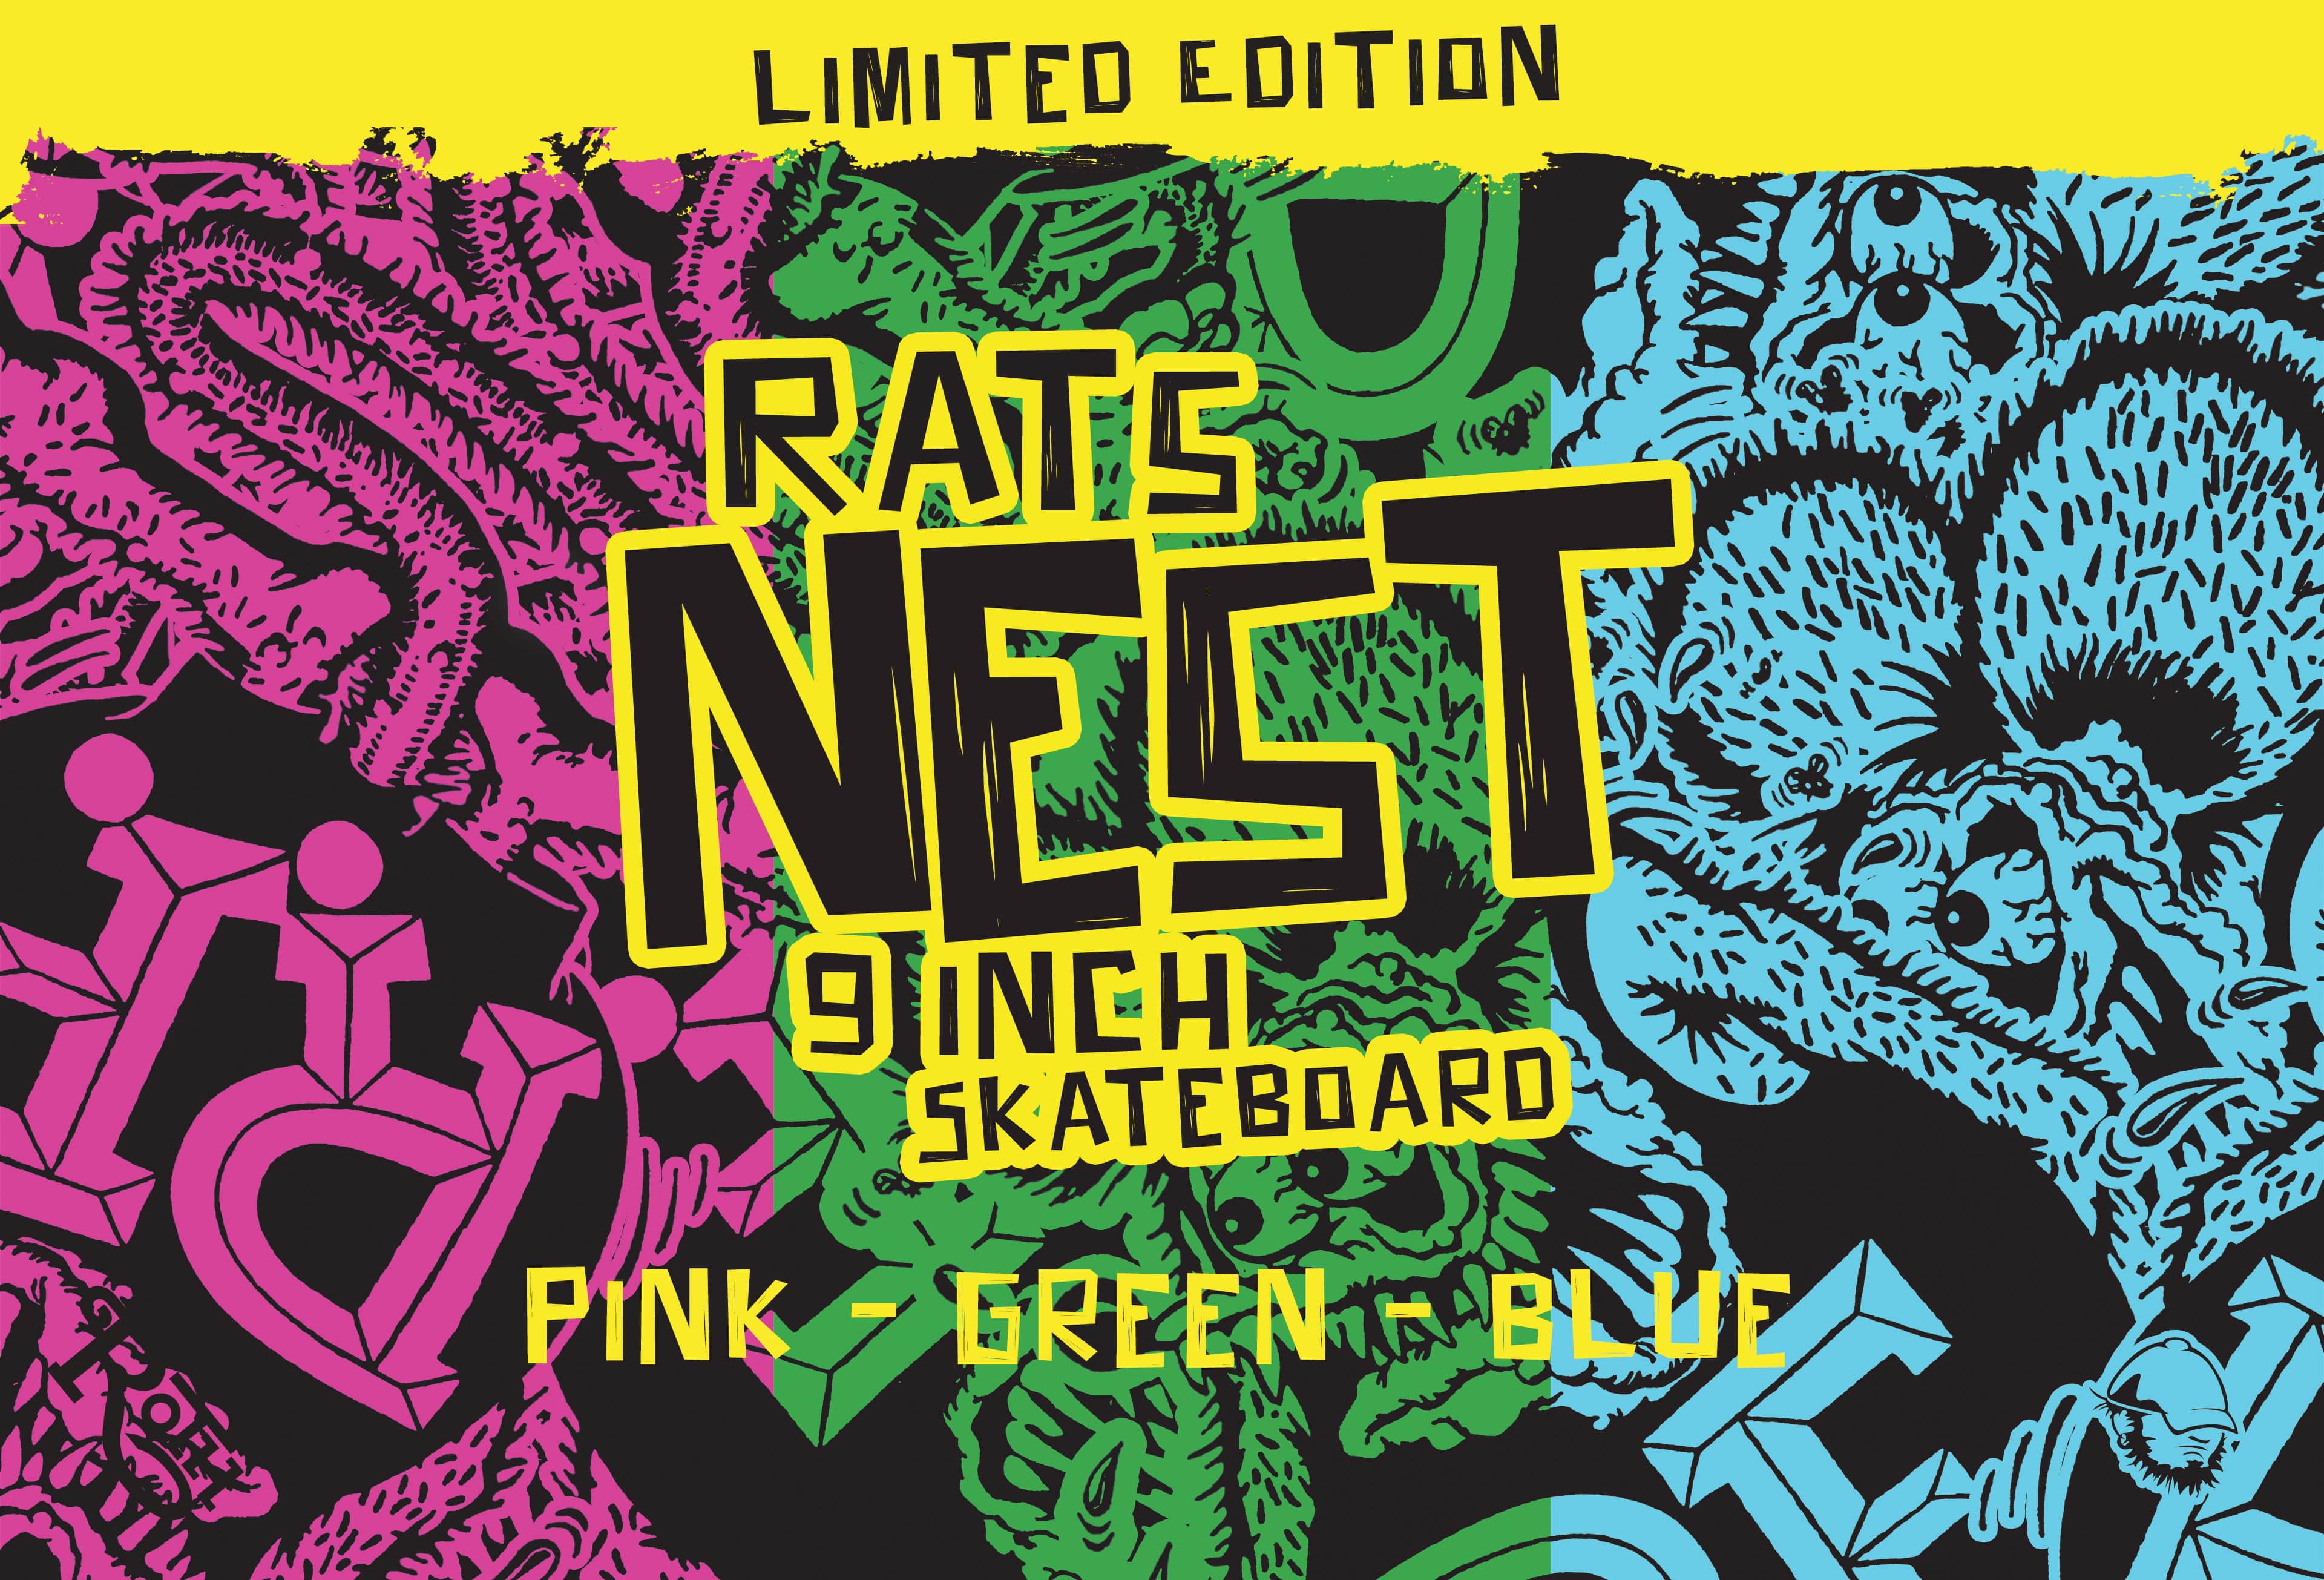 Limited Edition - Rats Nest - 9 inch Skateboard